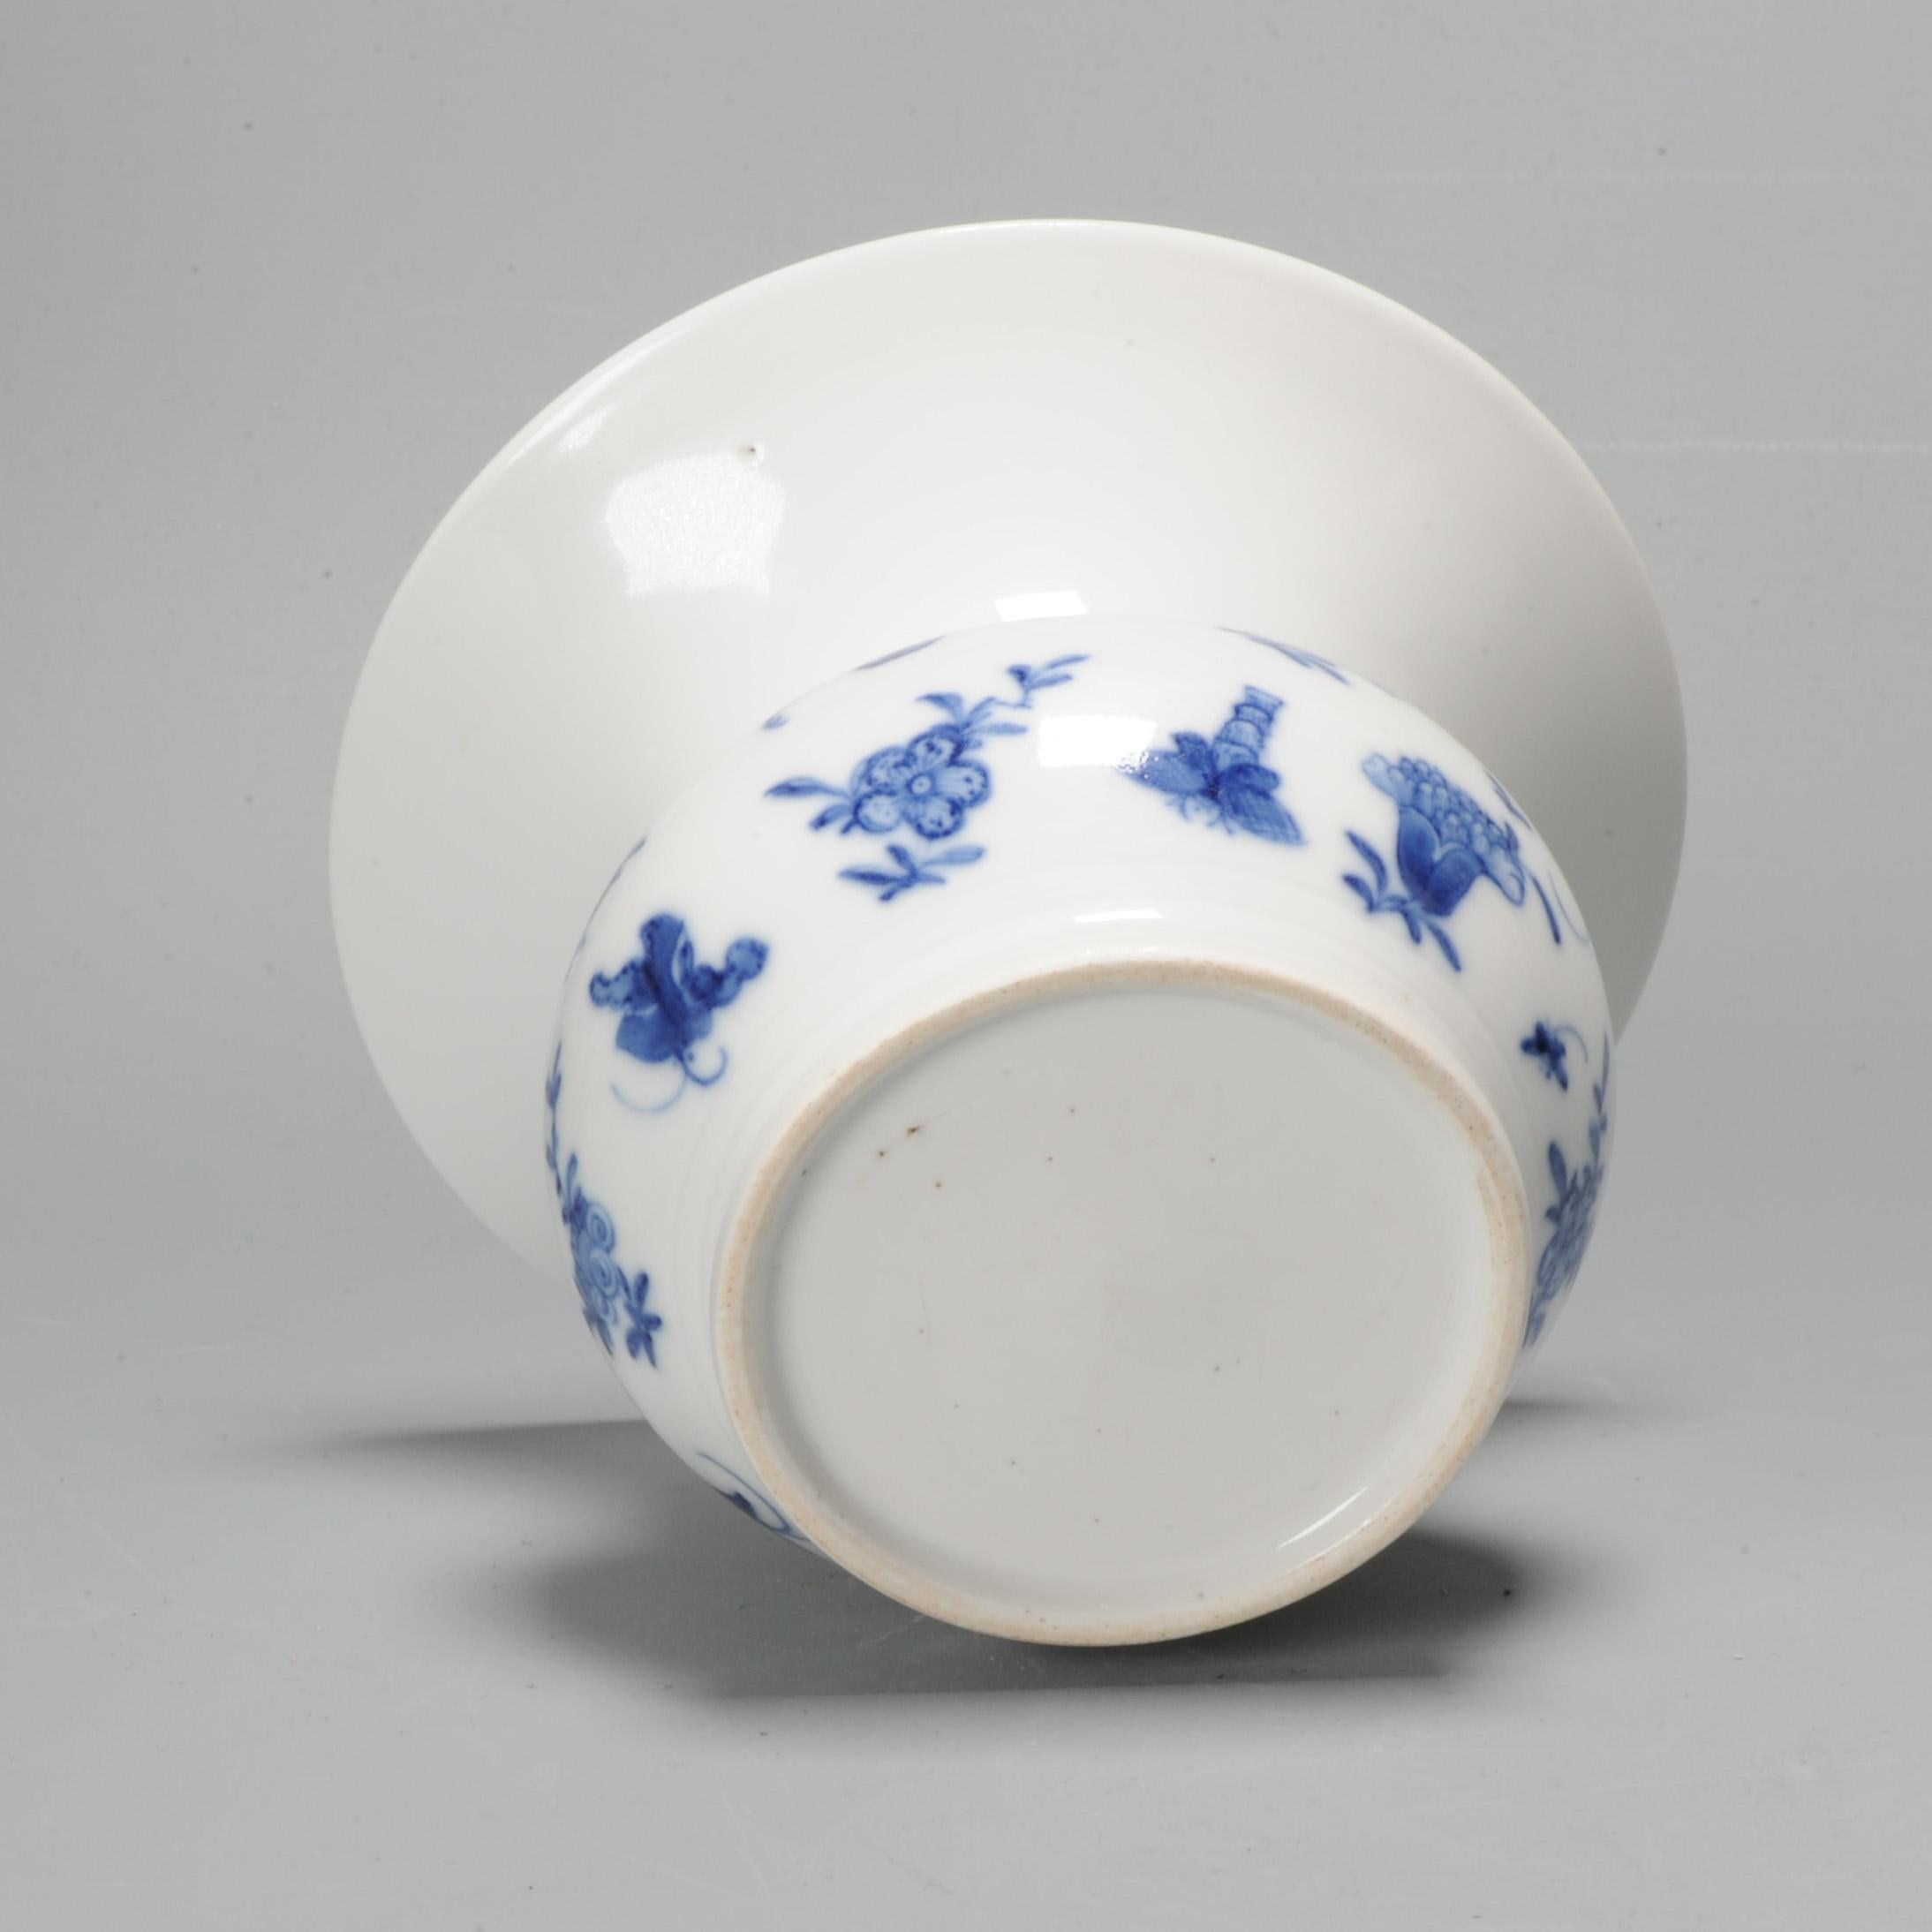 Superb antique Chinese porcelain zhadou. Blue de Hue porcelain for the Vietnamese market. Decorated with butterflies, flowers and bats. The porcelain is almost like soft paste from the Qianlong period.

Such small 'zhadou' were used as table-top